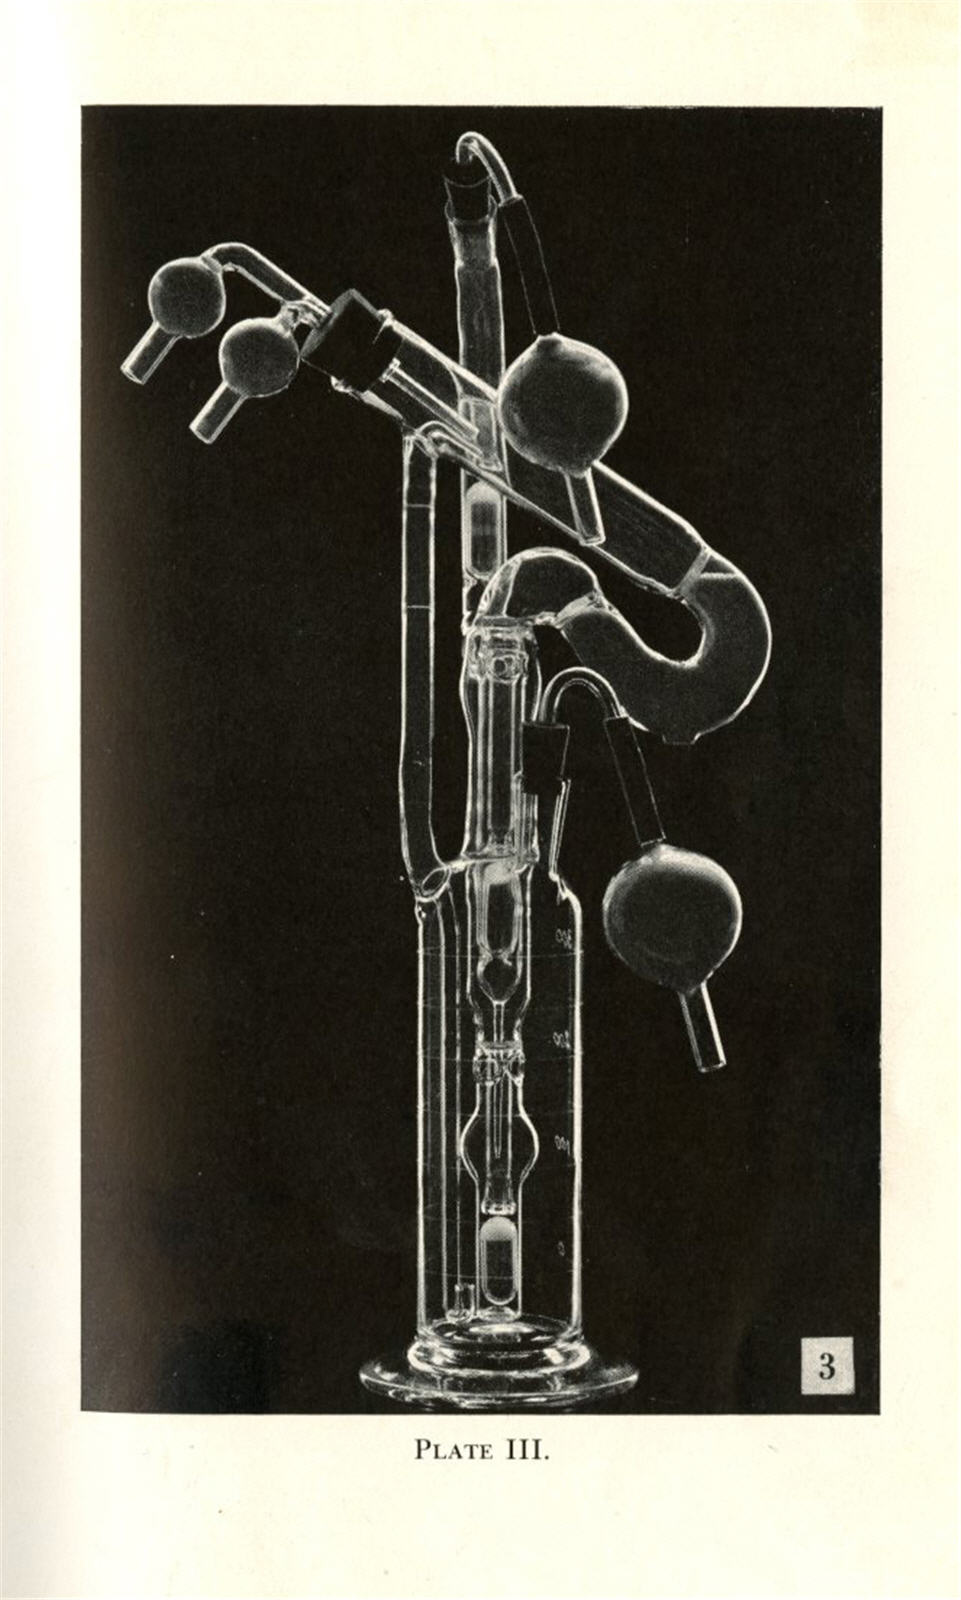 Tall, narrow, glass instrument with curved, cylindrical pipes and valves.